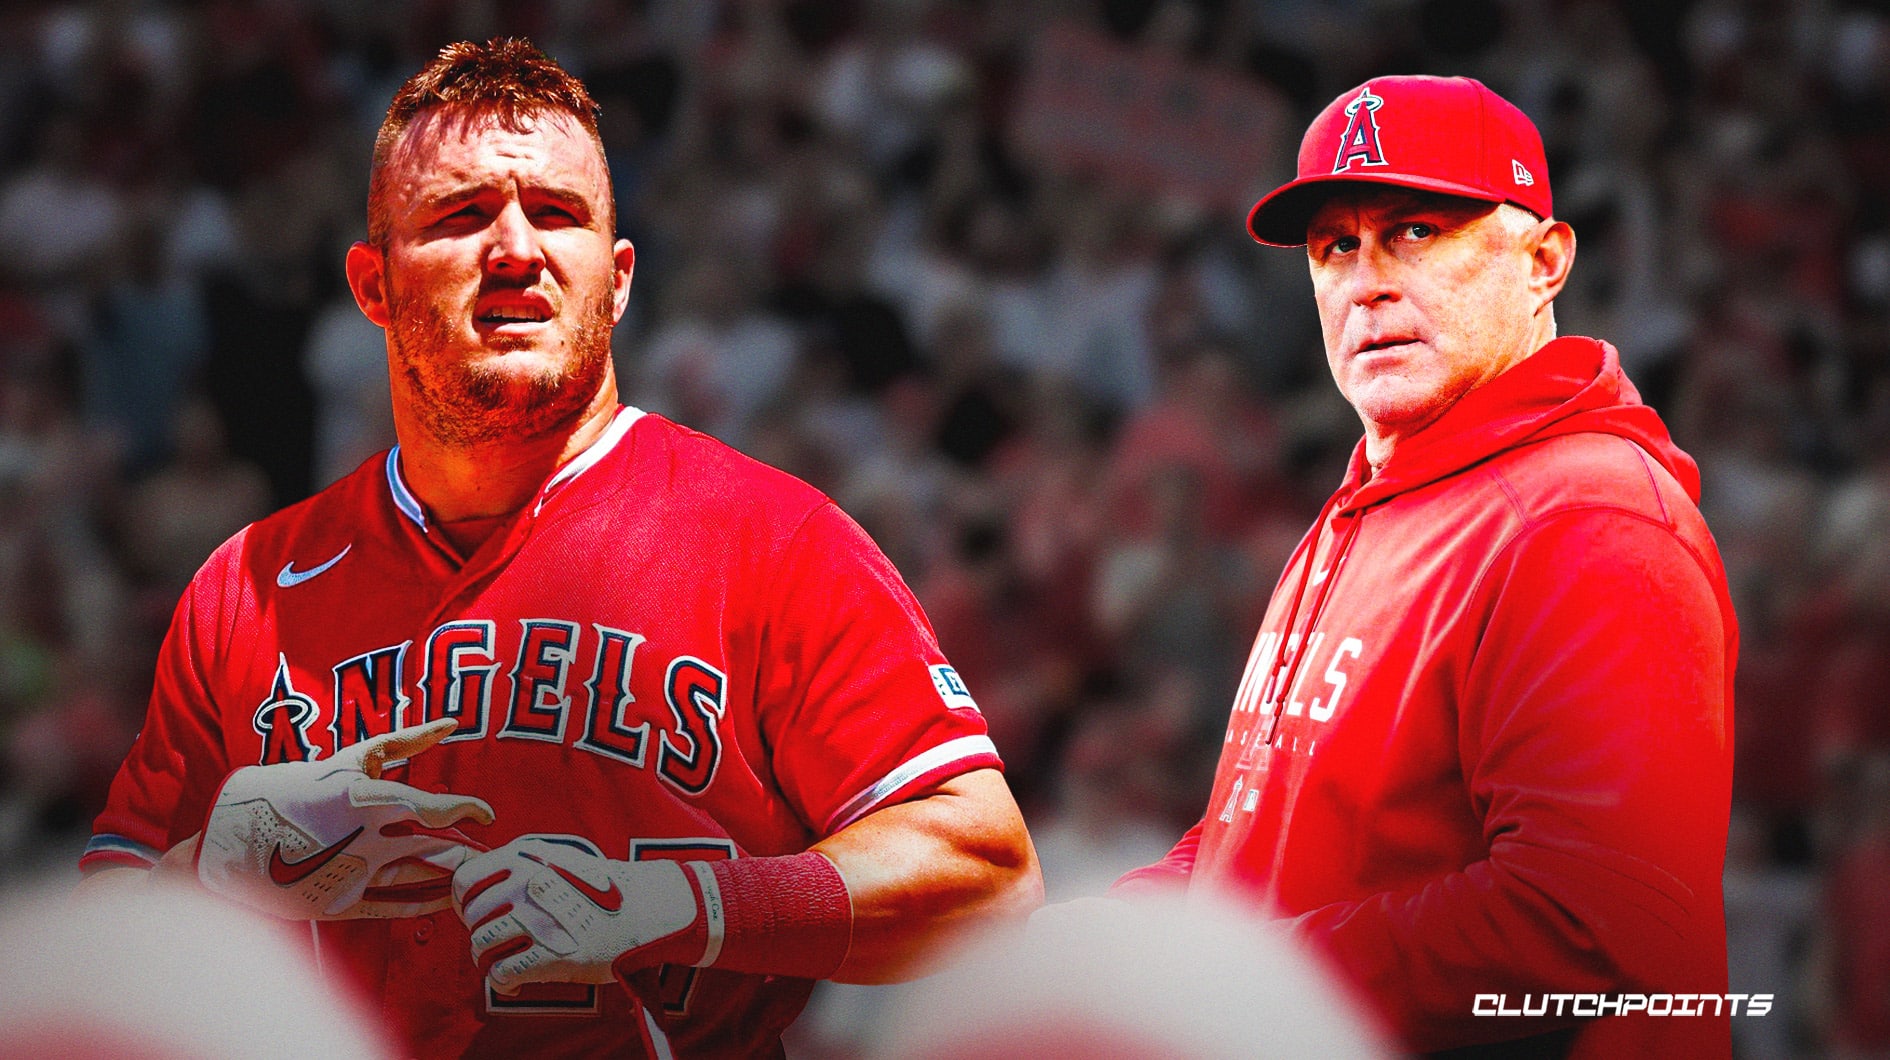 Never felt it before': Mike Trout's worrying outlook on injury